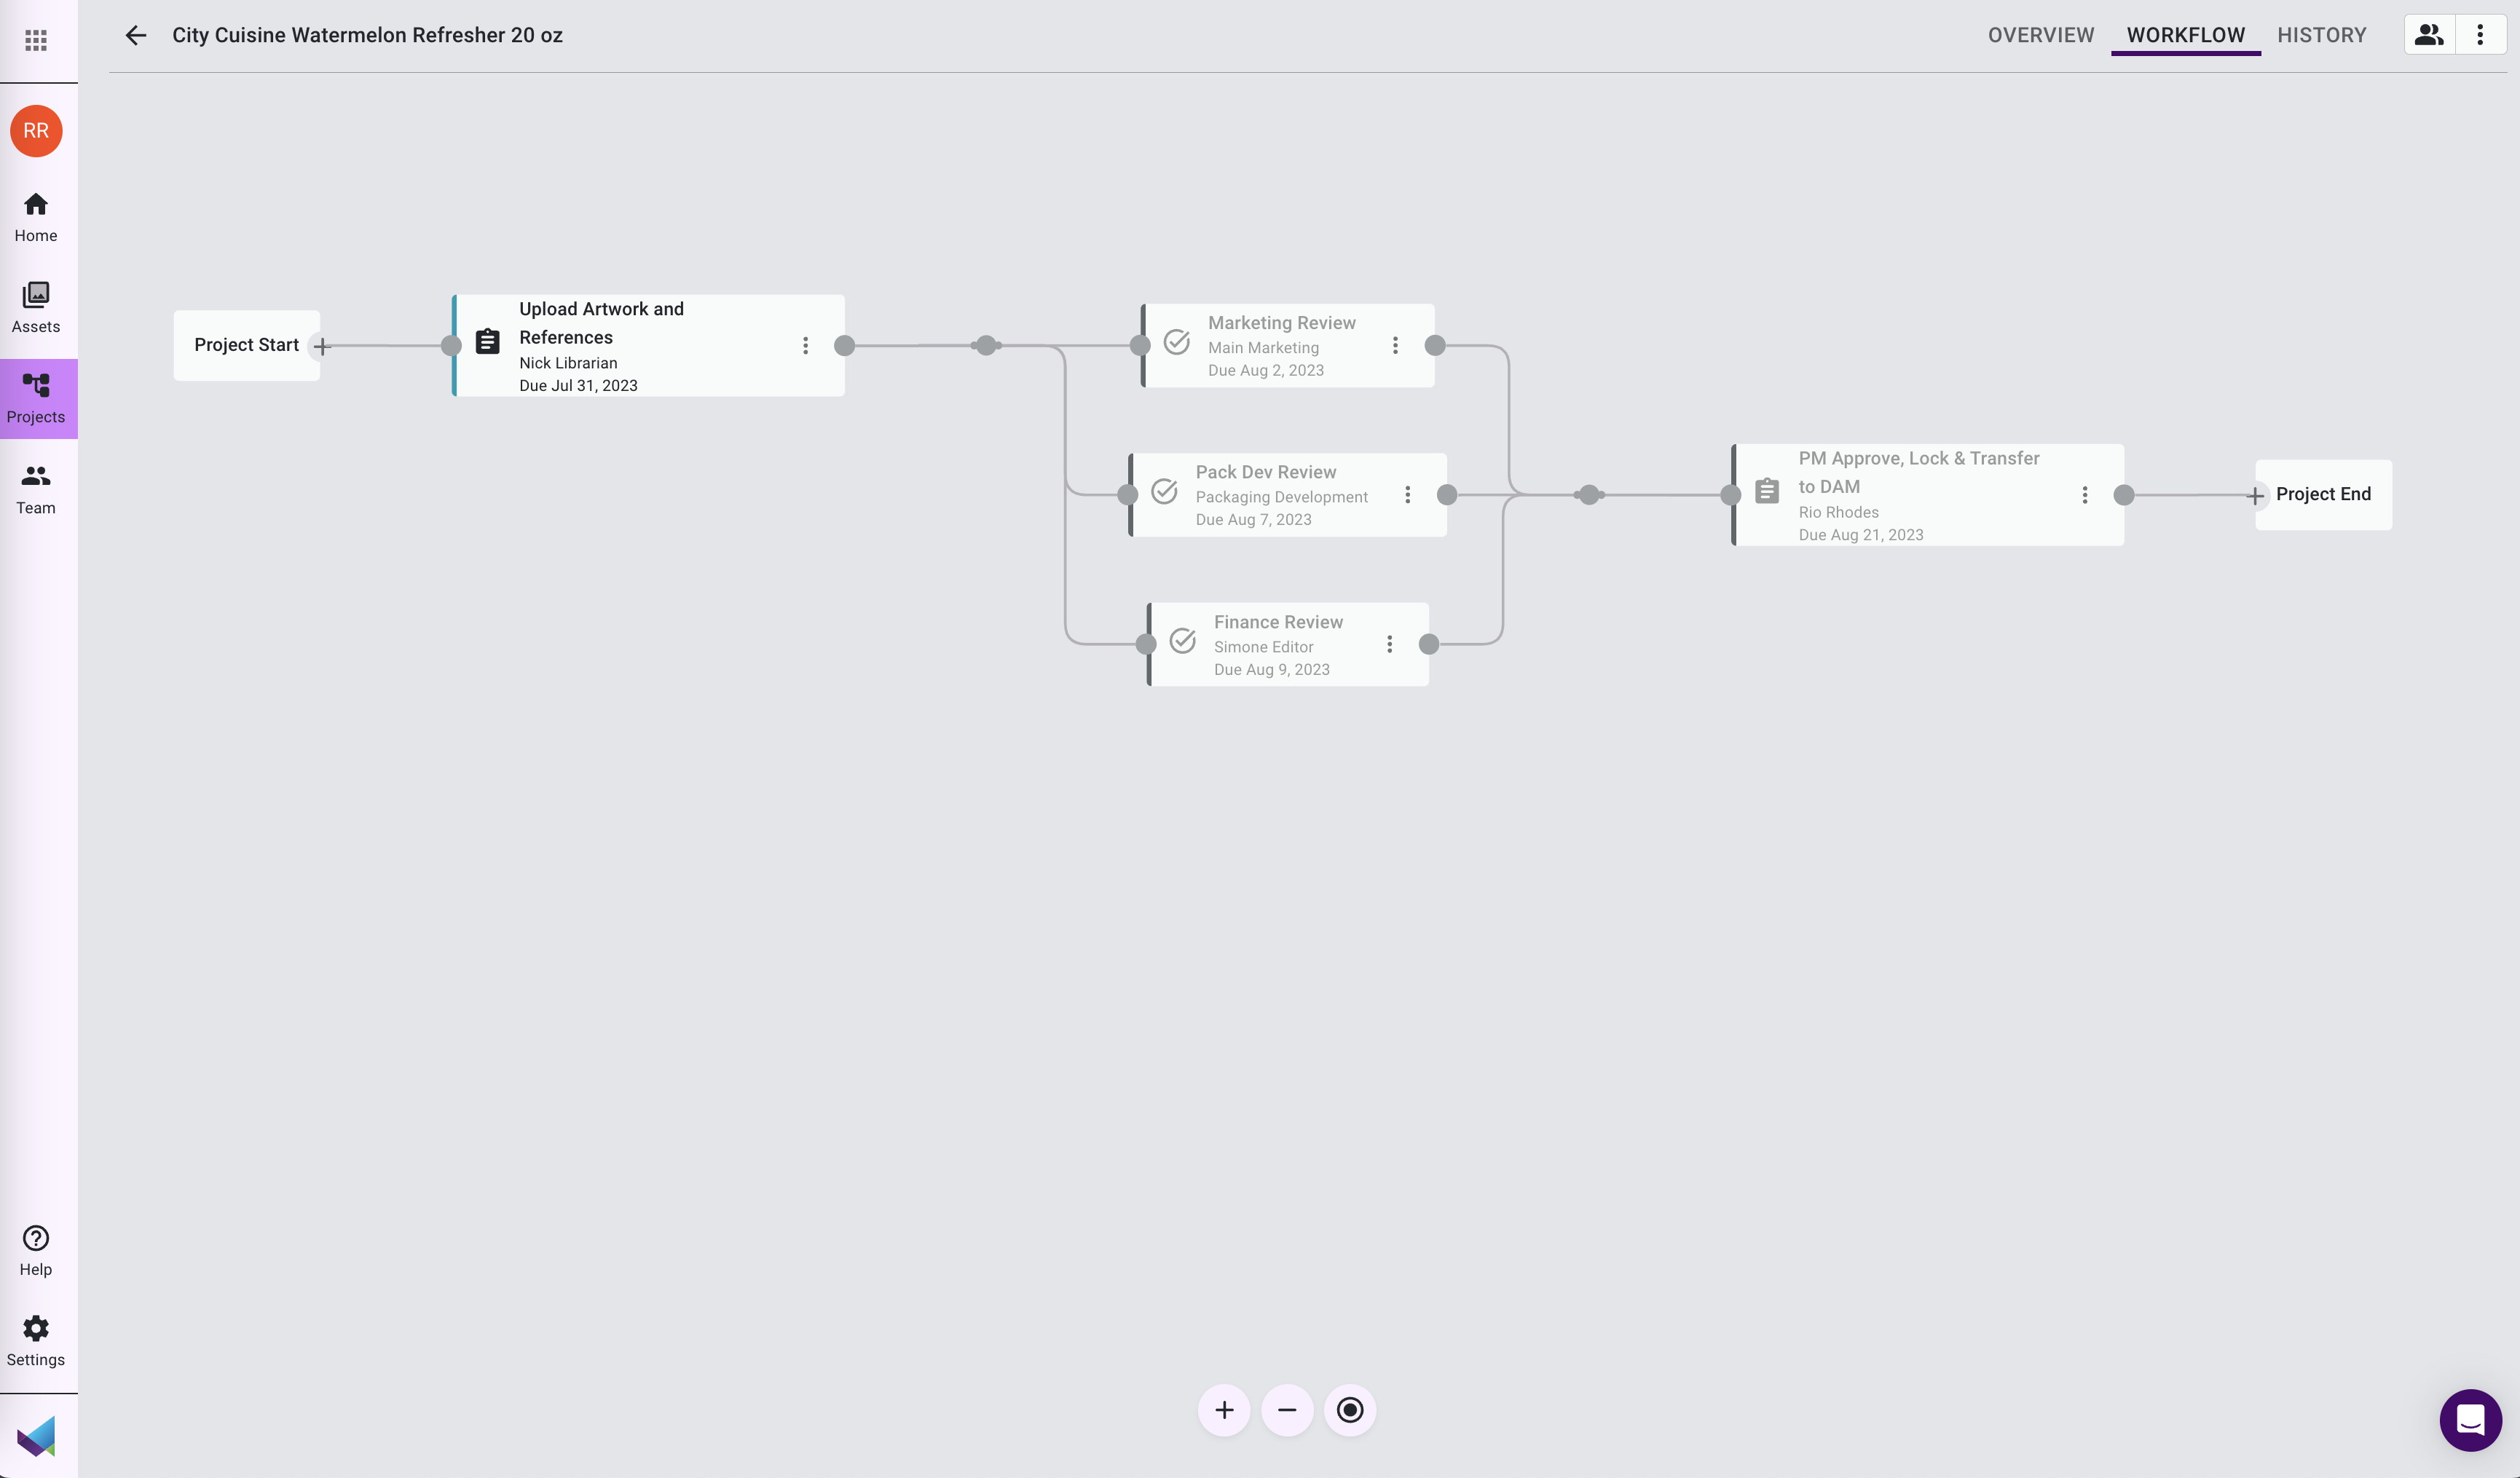 Image shows a stakeholder workflow in Mox